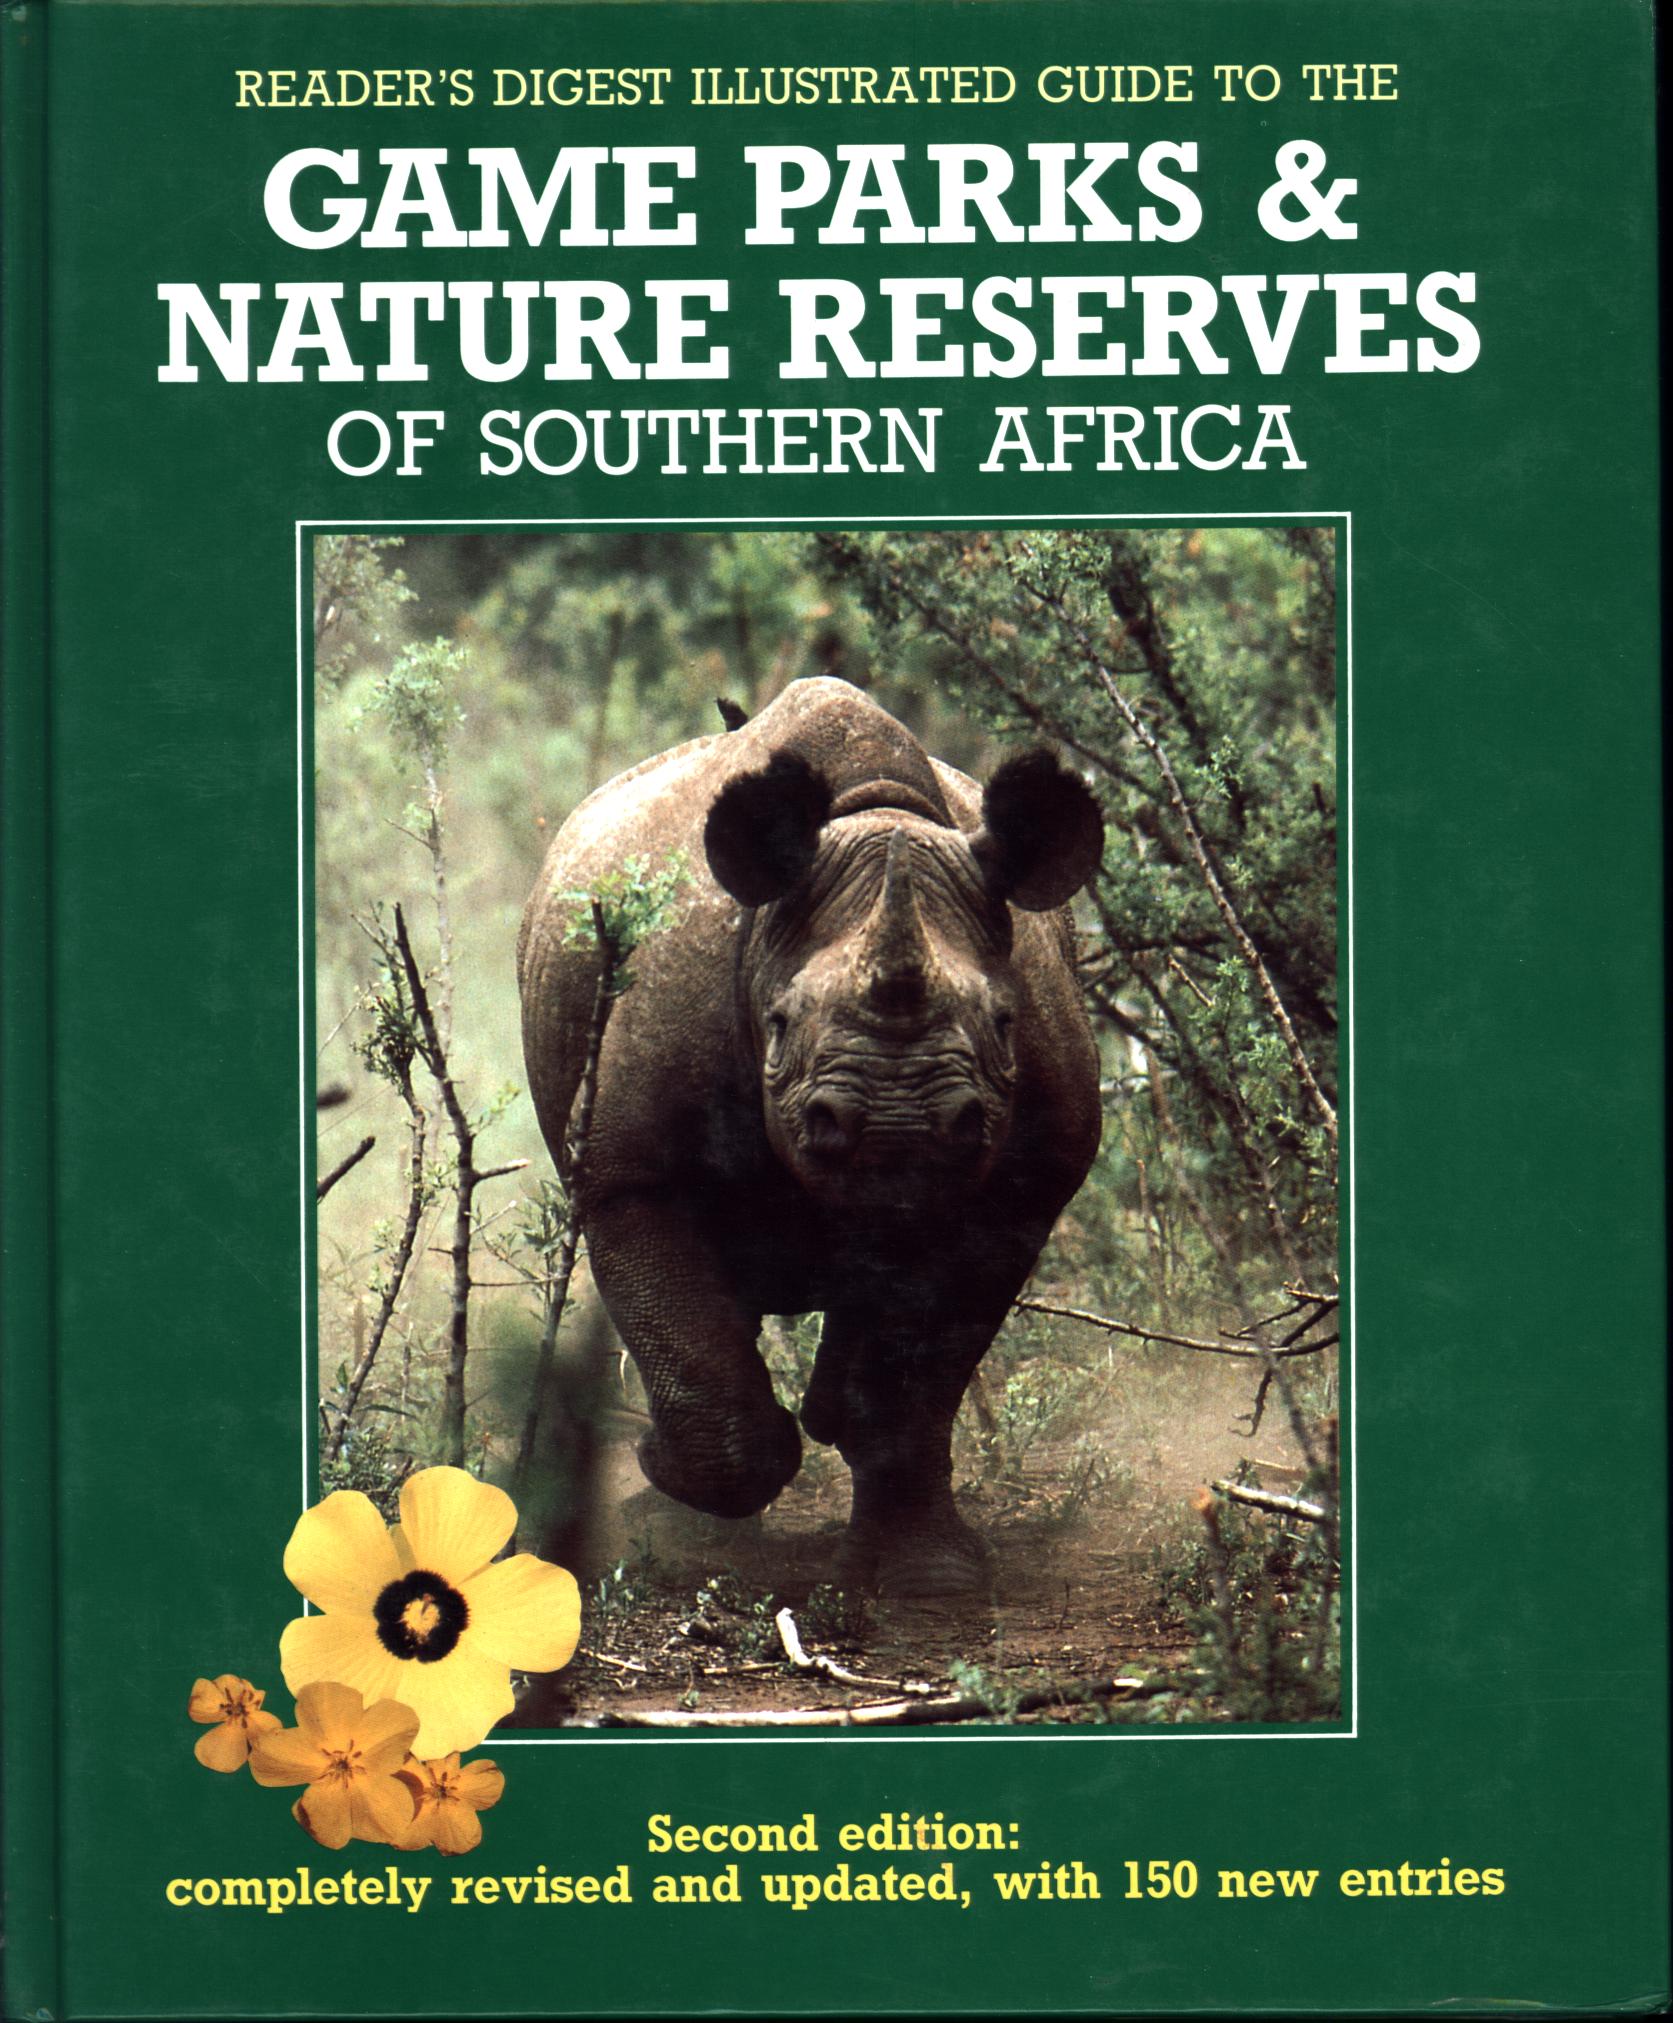 ILLUSTRATED GUIDE TO THE GAME PARKS & NATURE PRESERVES OF SOUTHERN AFRICA. 